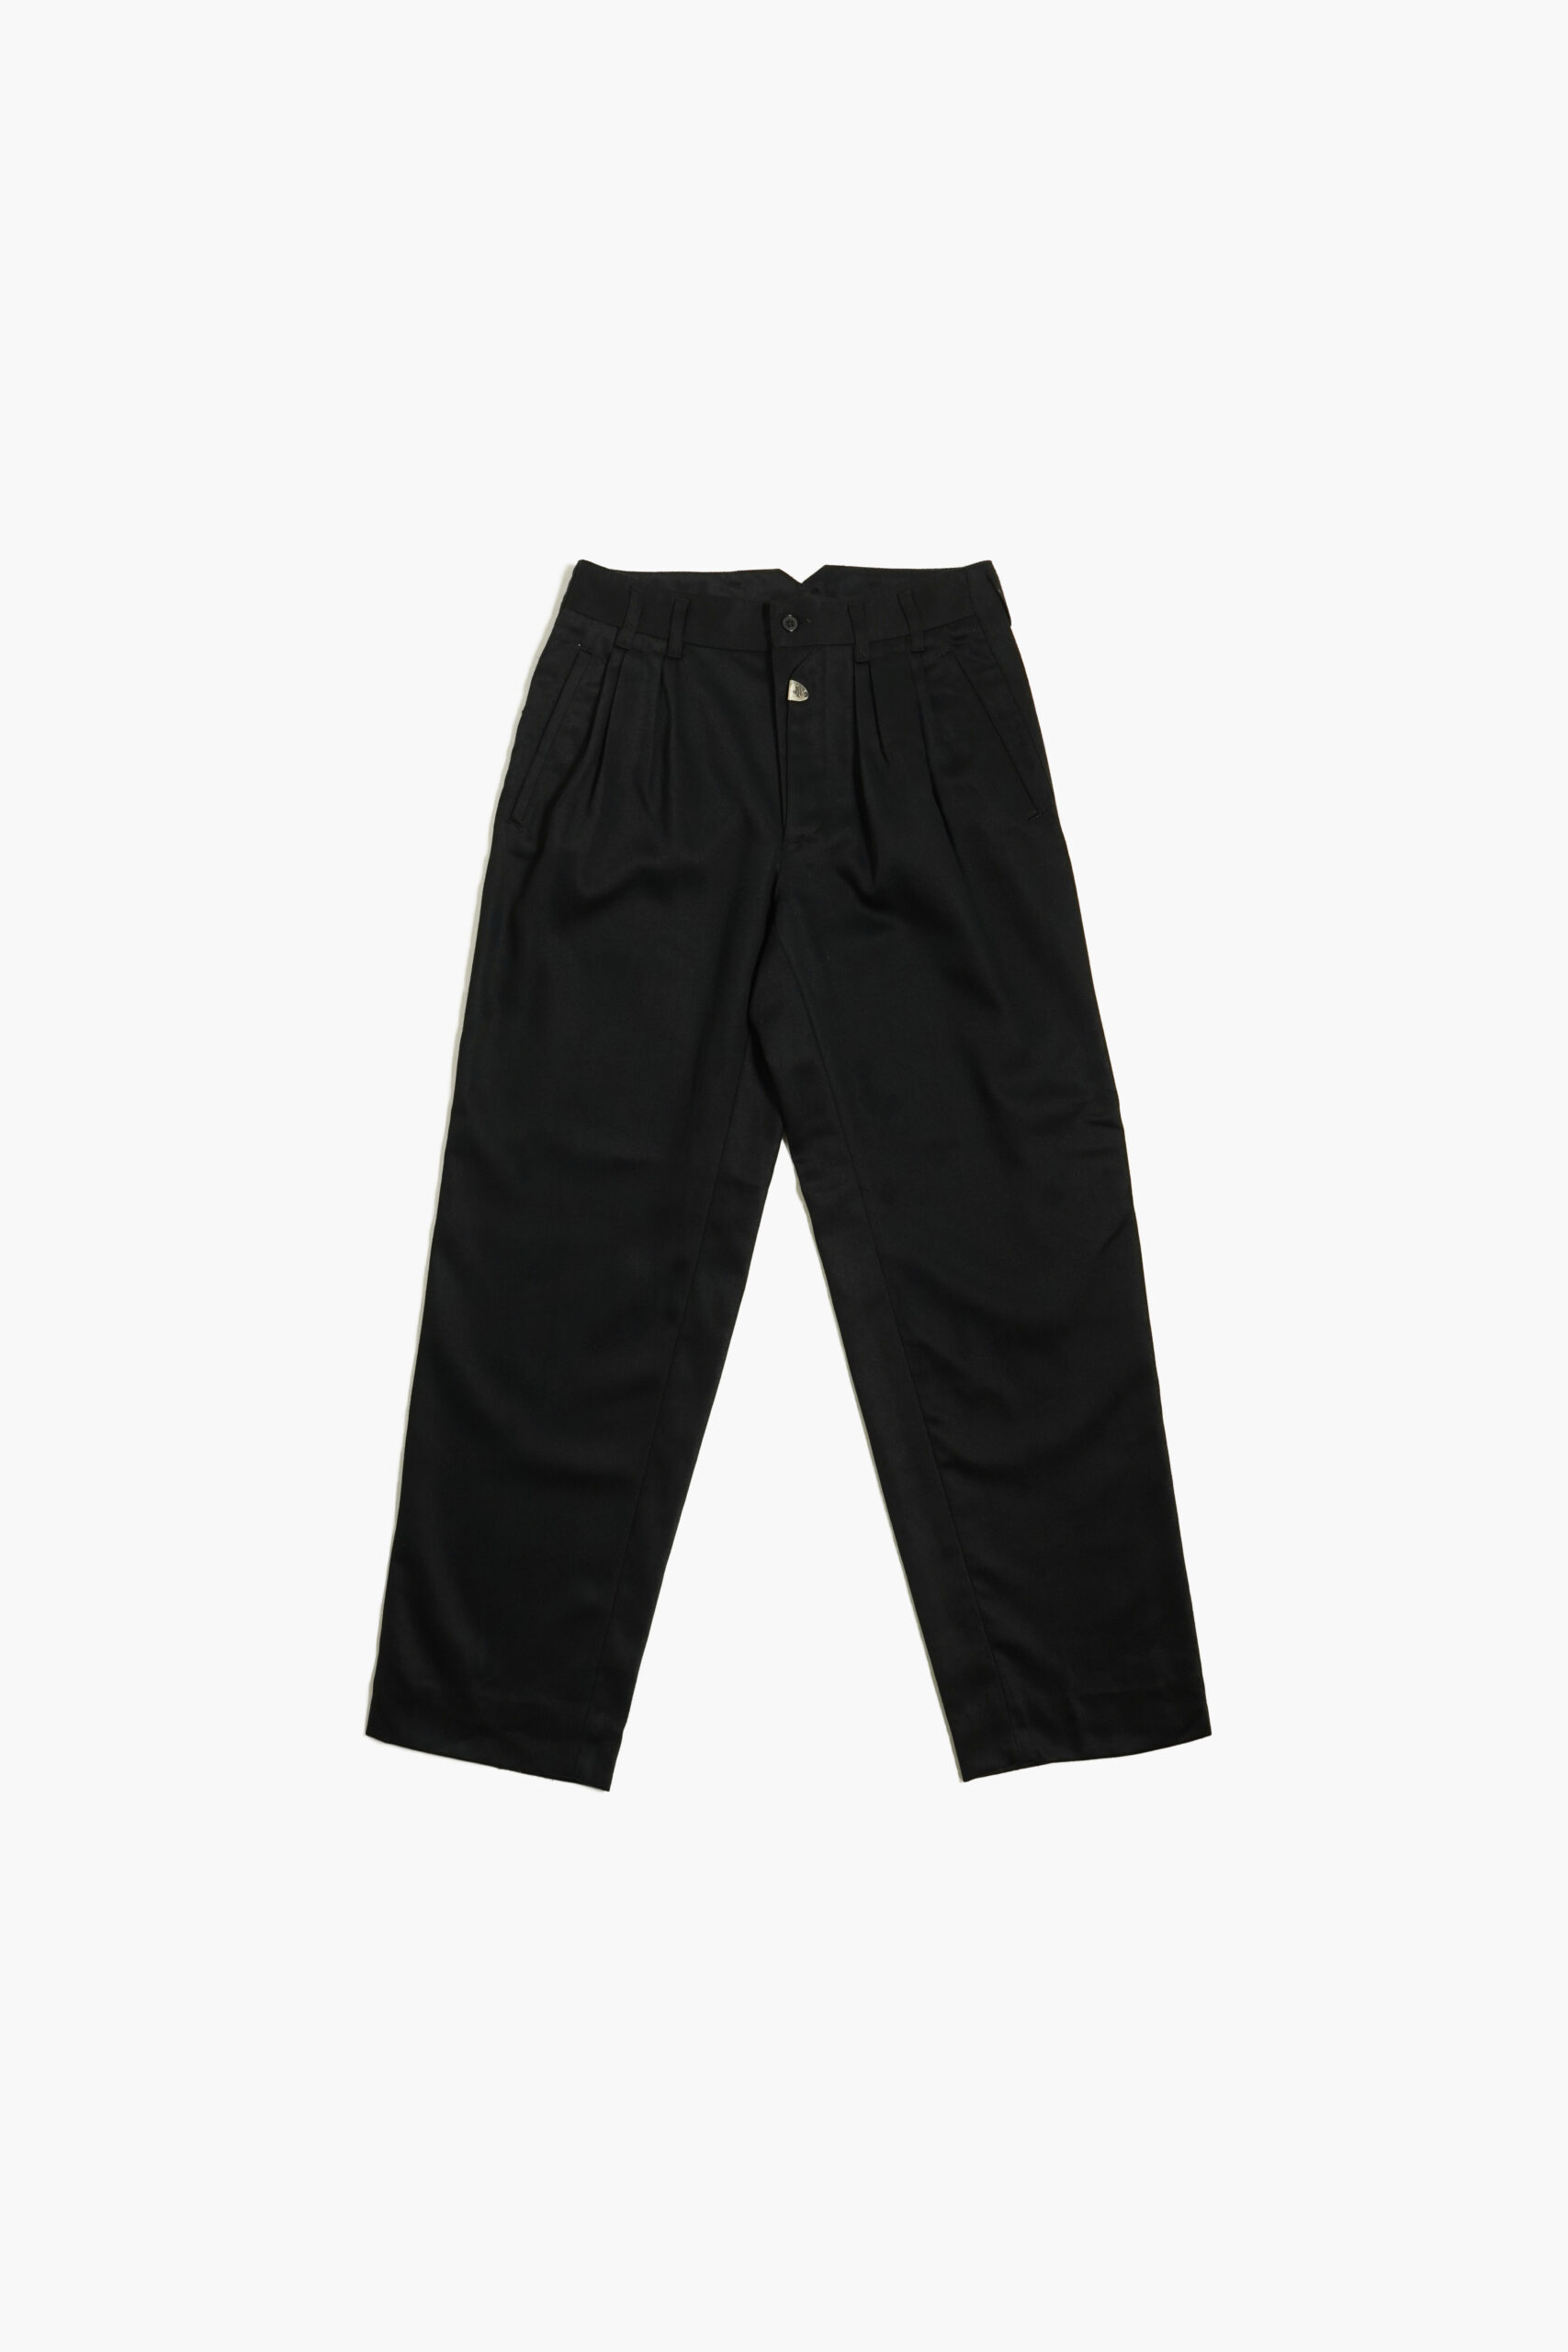 QUARRY MADE IN ITALY SLACKS PANTS 32